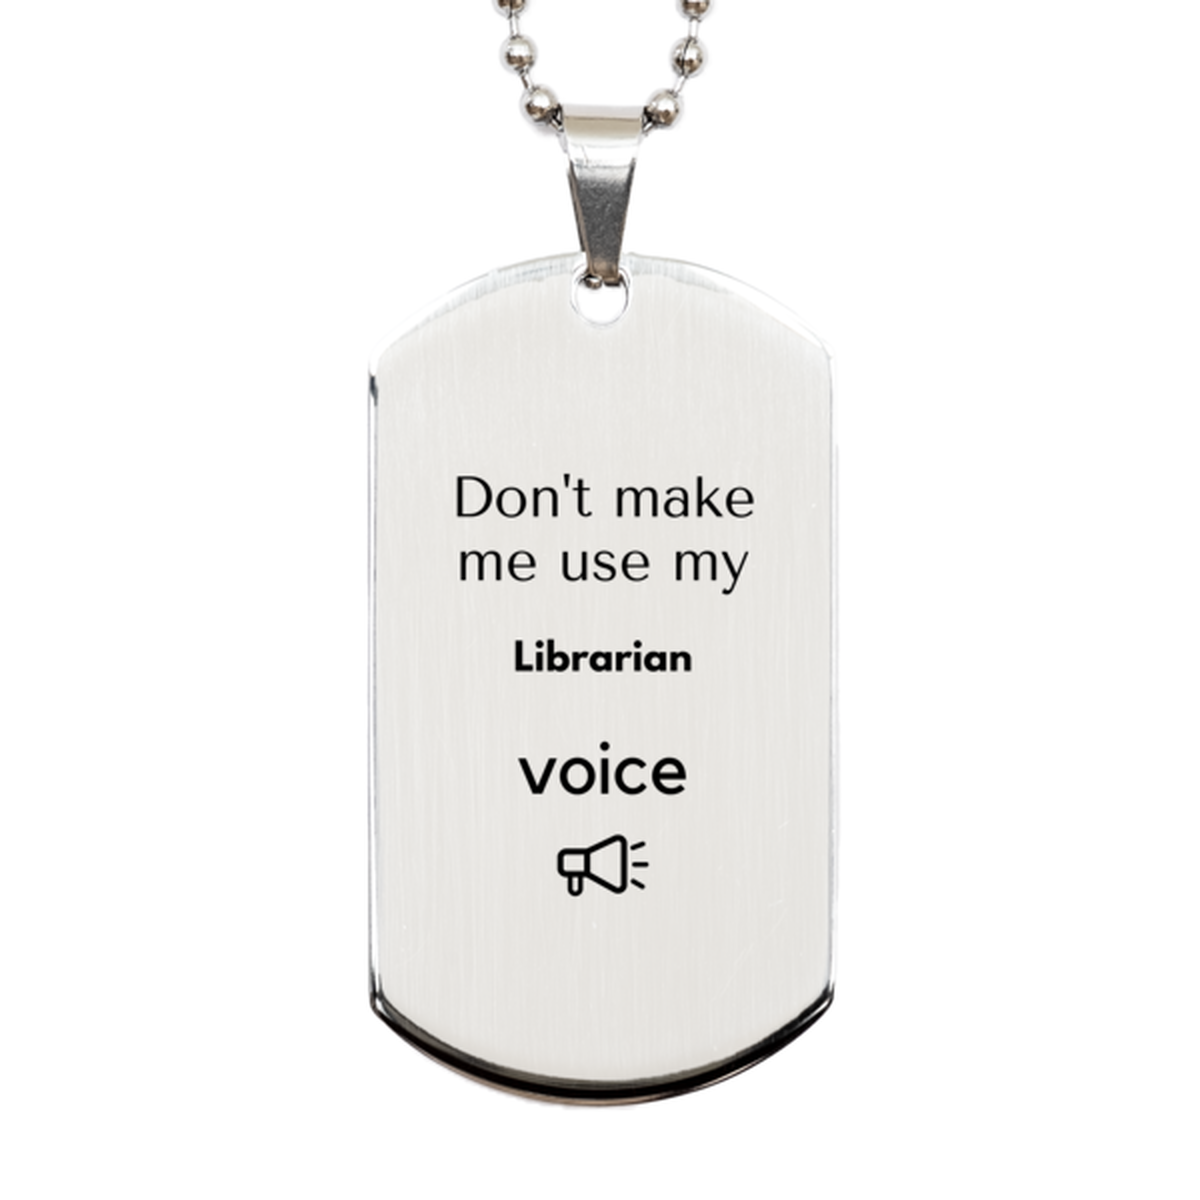 Don't make me use my Librarian voice, Sarcasm Librarian Gifts, Christmas Librarian Silver Dog Tag Birthday Unique Gifts For Librarian Coworkers, Men, Women, Colleague, Friends